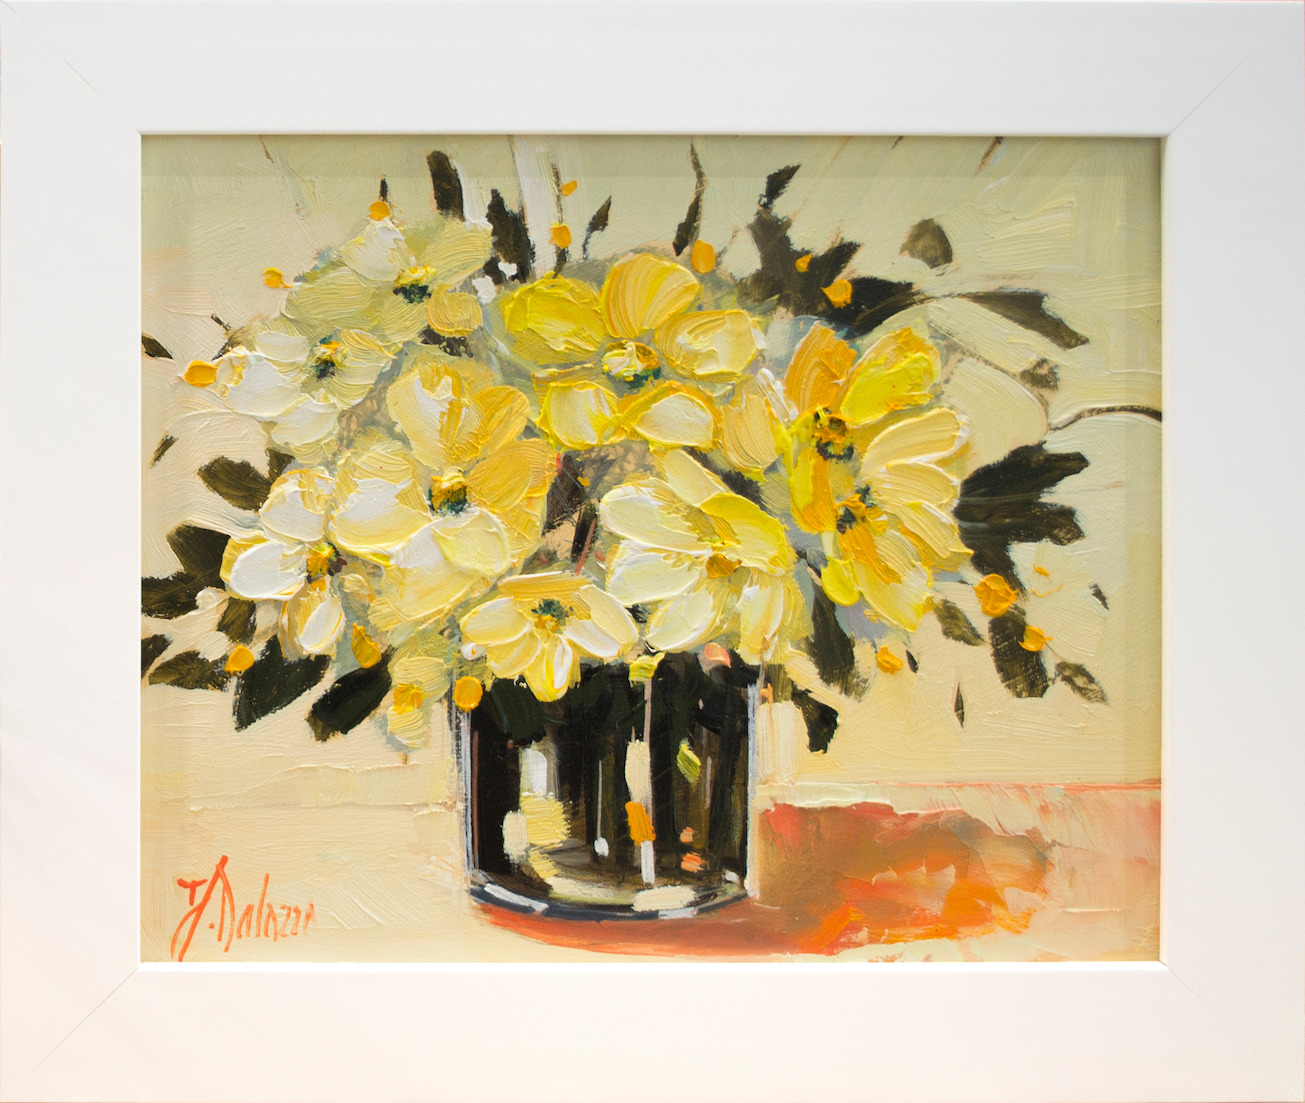 Framed Front View Of Still Life Painting "A Little Bit of Sunshine" By Judith Dalozzo